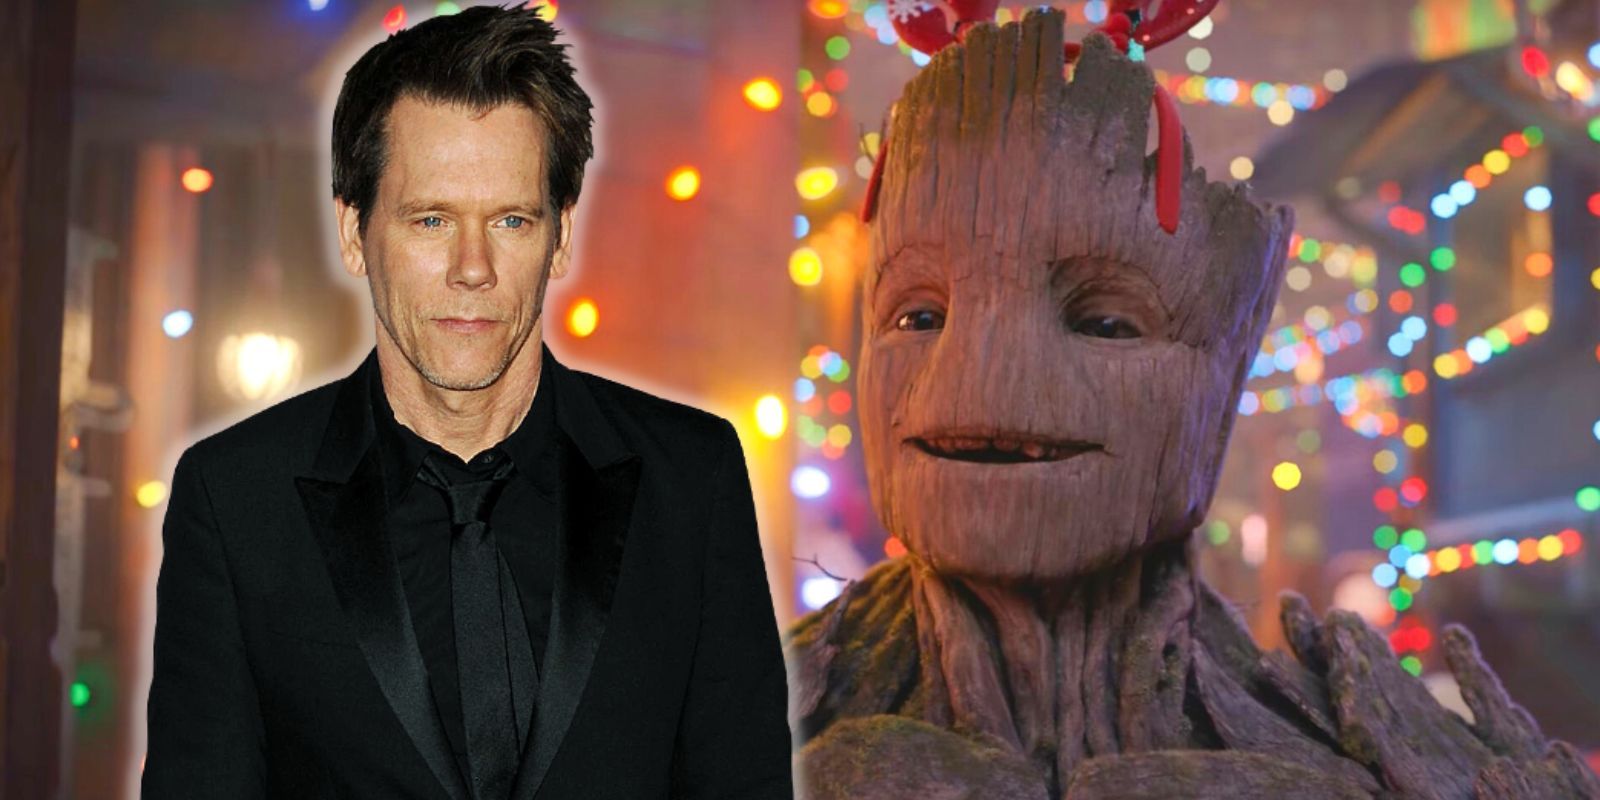 Kevin Bacon in a black suit standing alongside a bemused Groot 